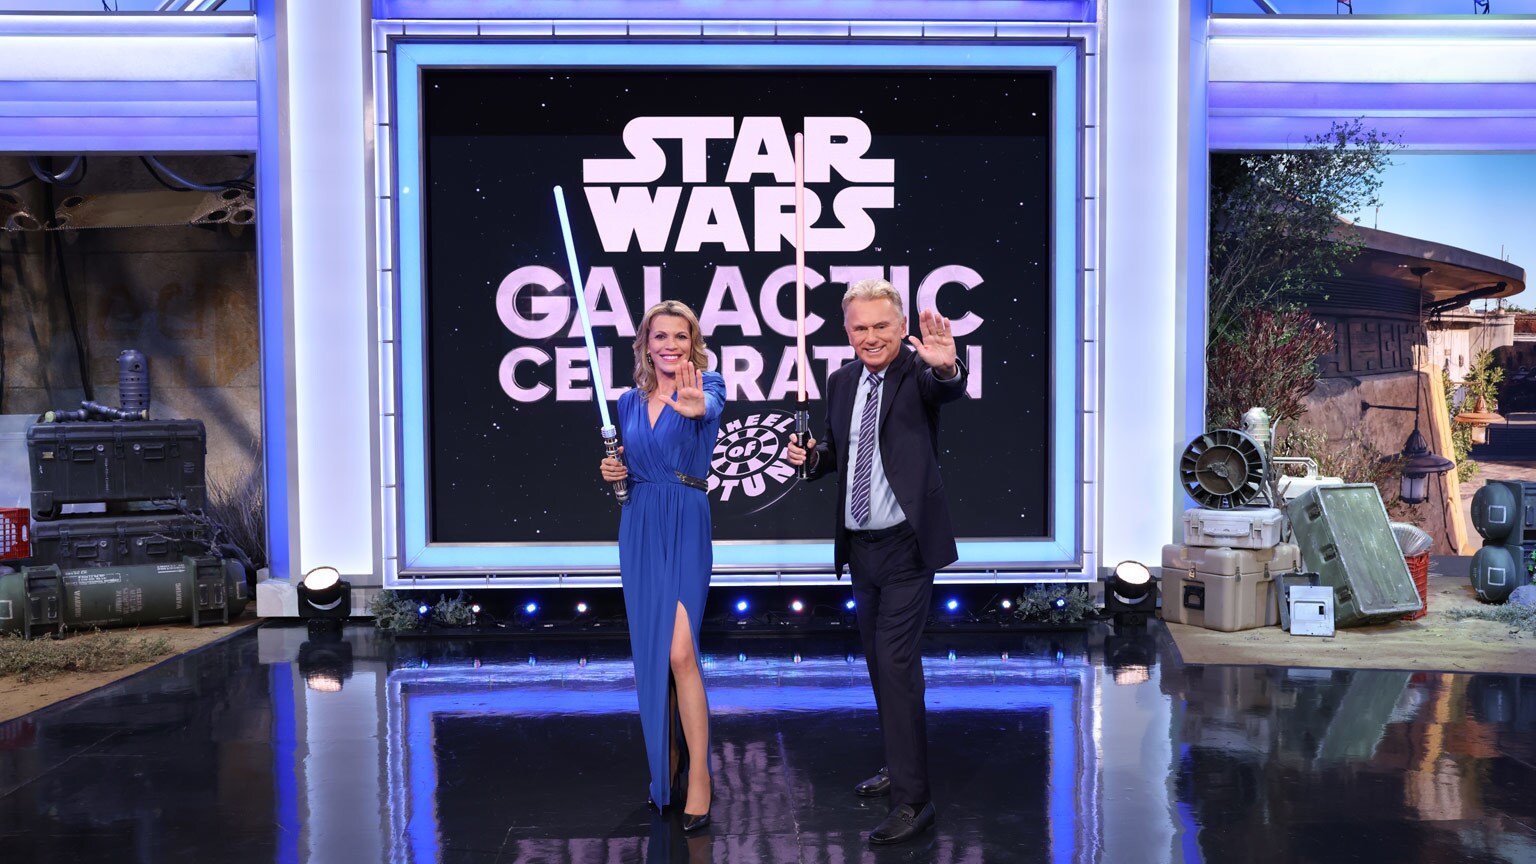 Wheel of Fortune Spins to the Galaxy Far, Far Away